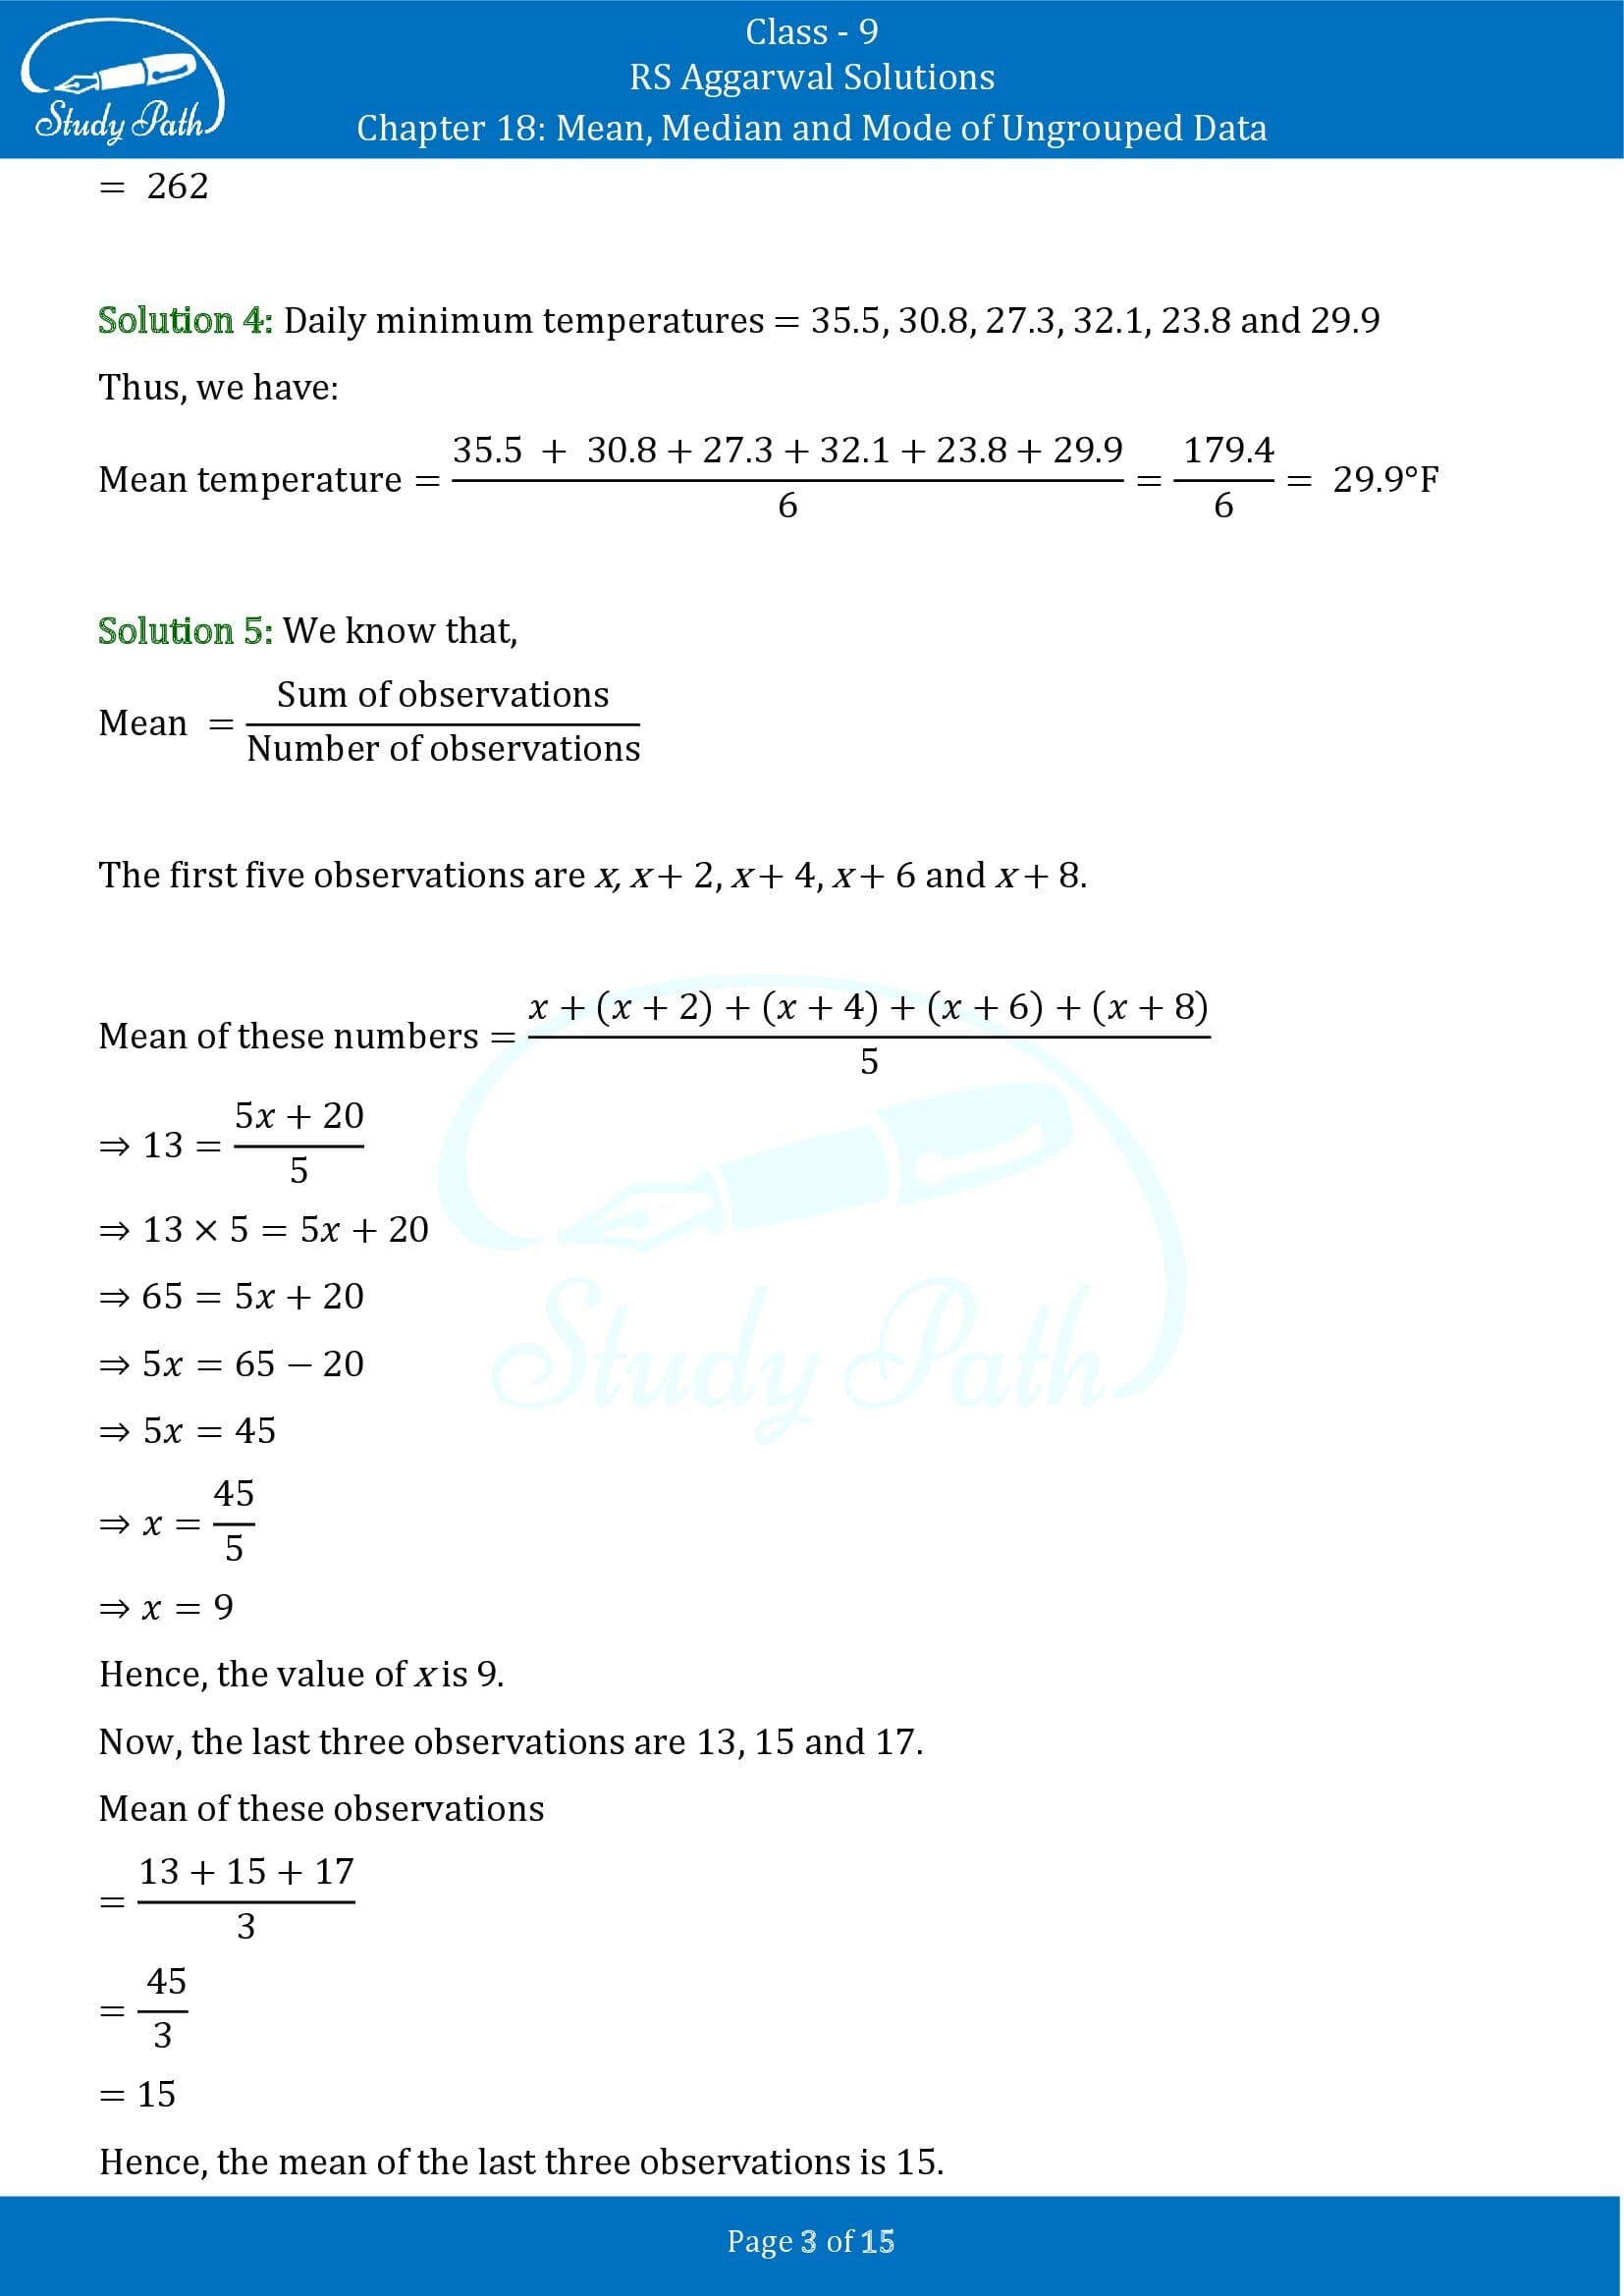 RS Aggarwal Solutions Class 9 Chapter 18 Mean Median and Mode of Ungrouped Data Exercise 18A 00003